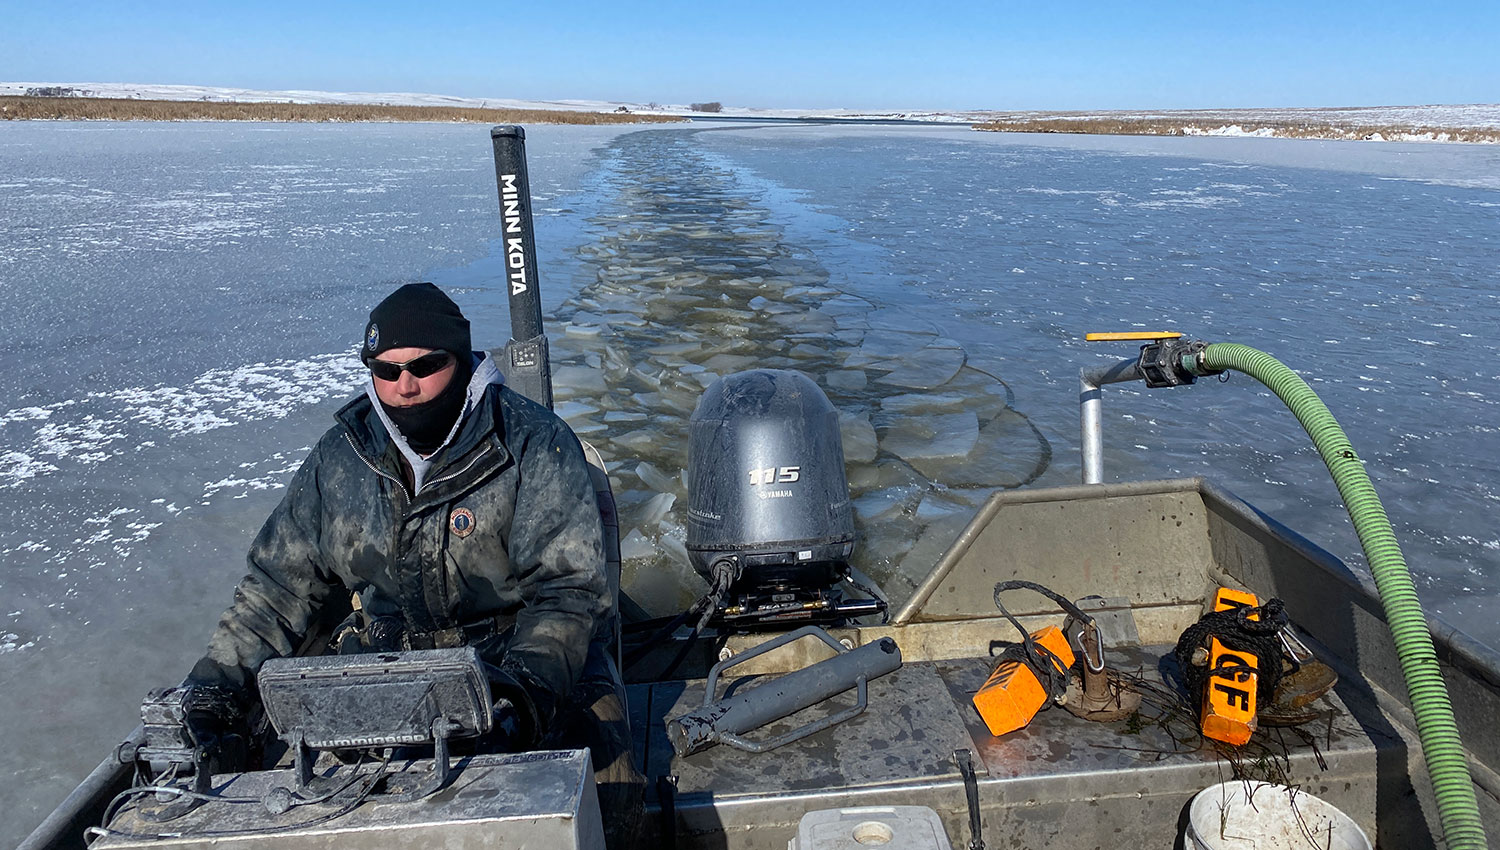 Fisheries biologist driving boat through thin ice